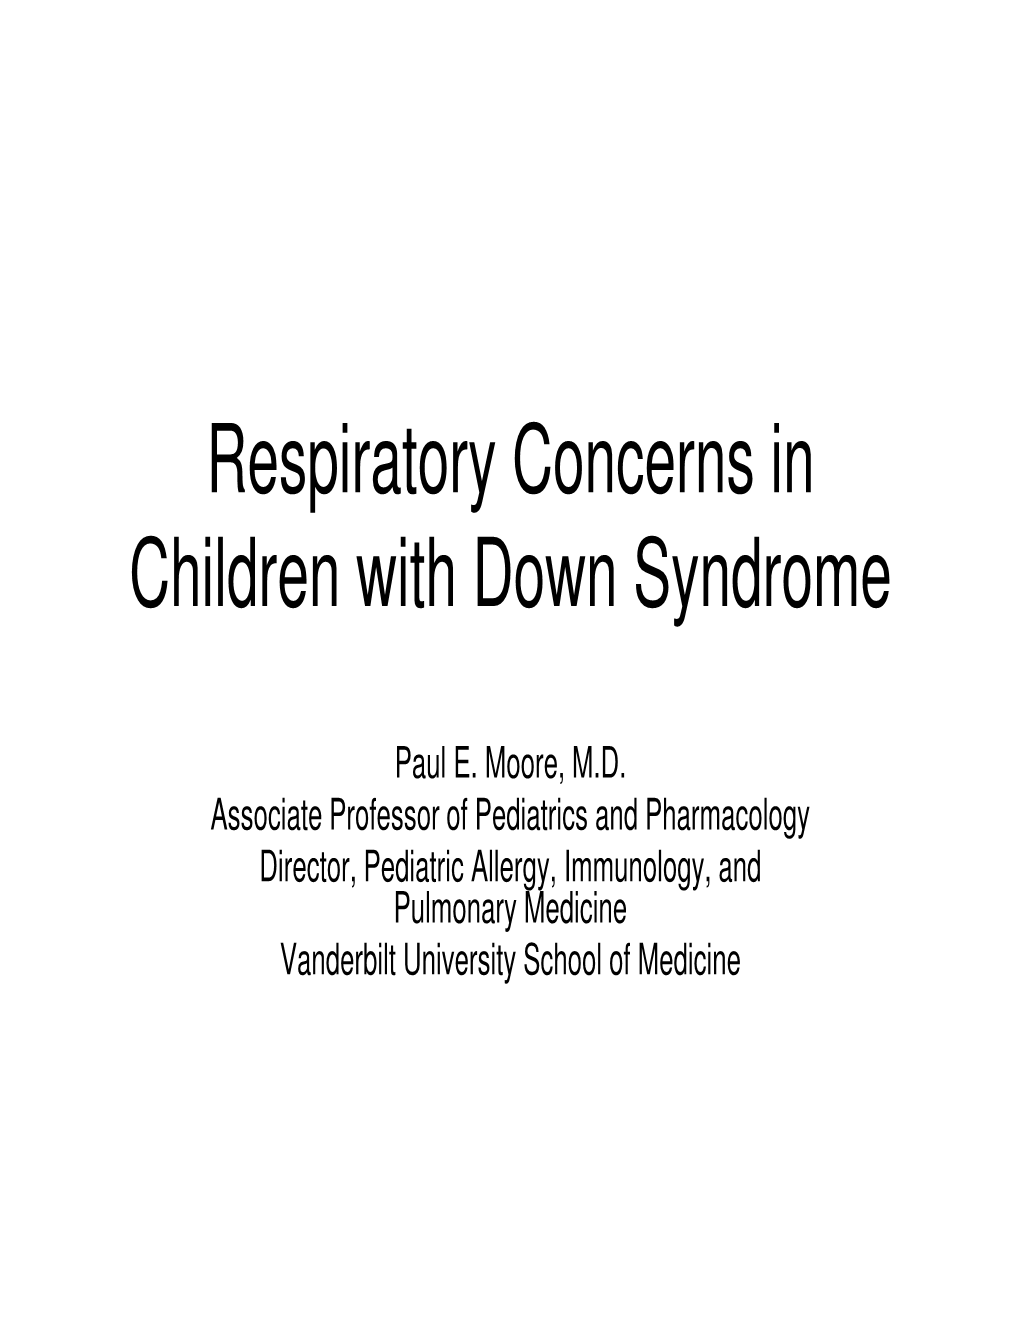 Respiratory Concerns in Children with Down Syndrome